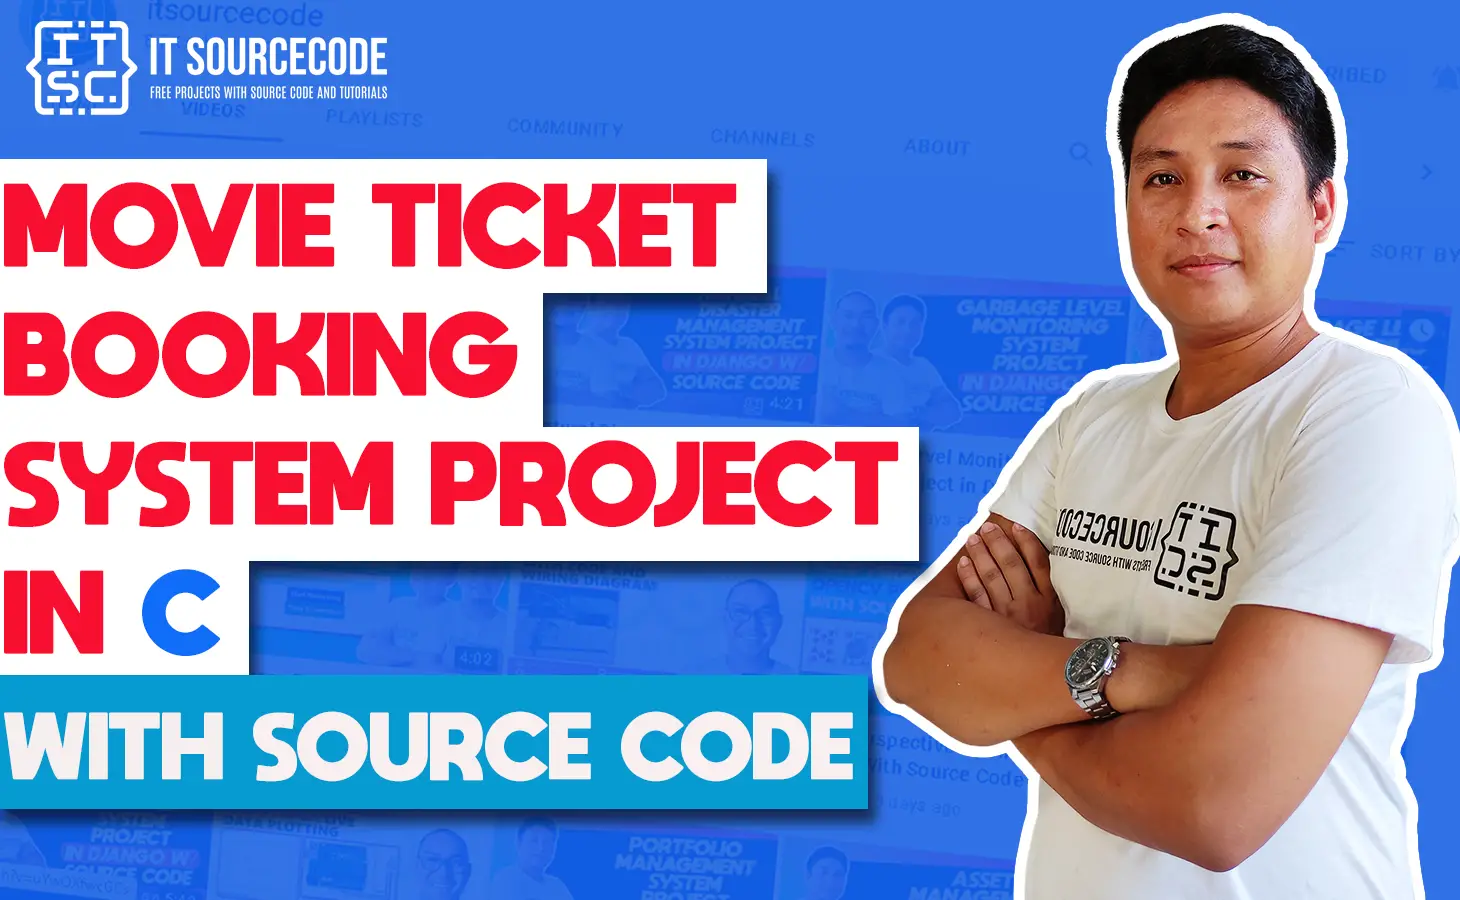 Movie Ticket Booking System Project in C with Source Code